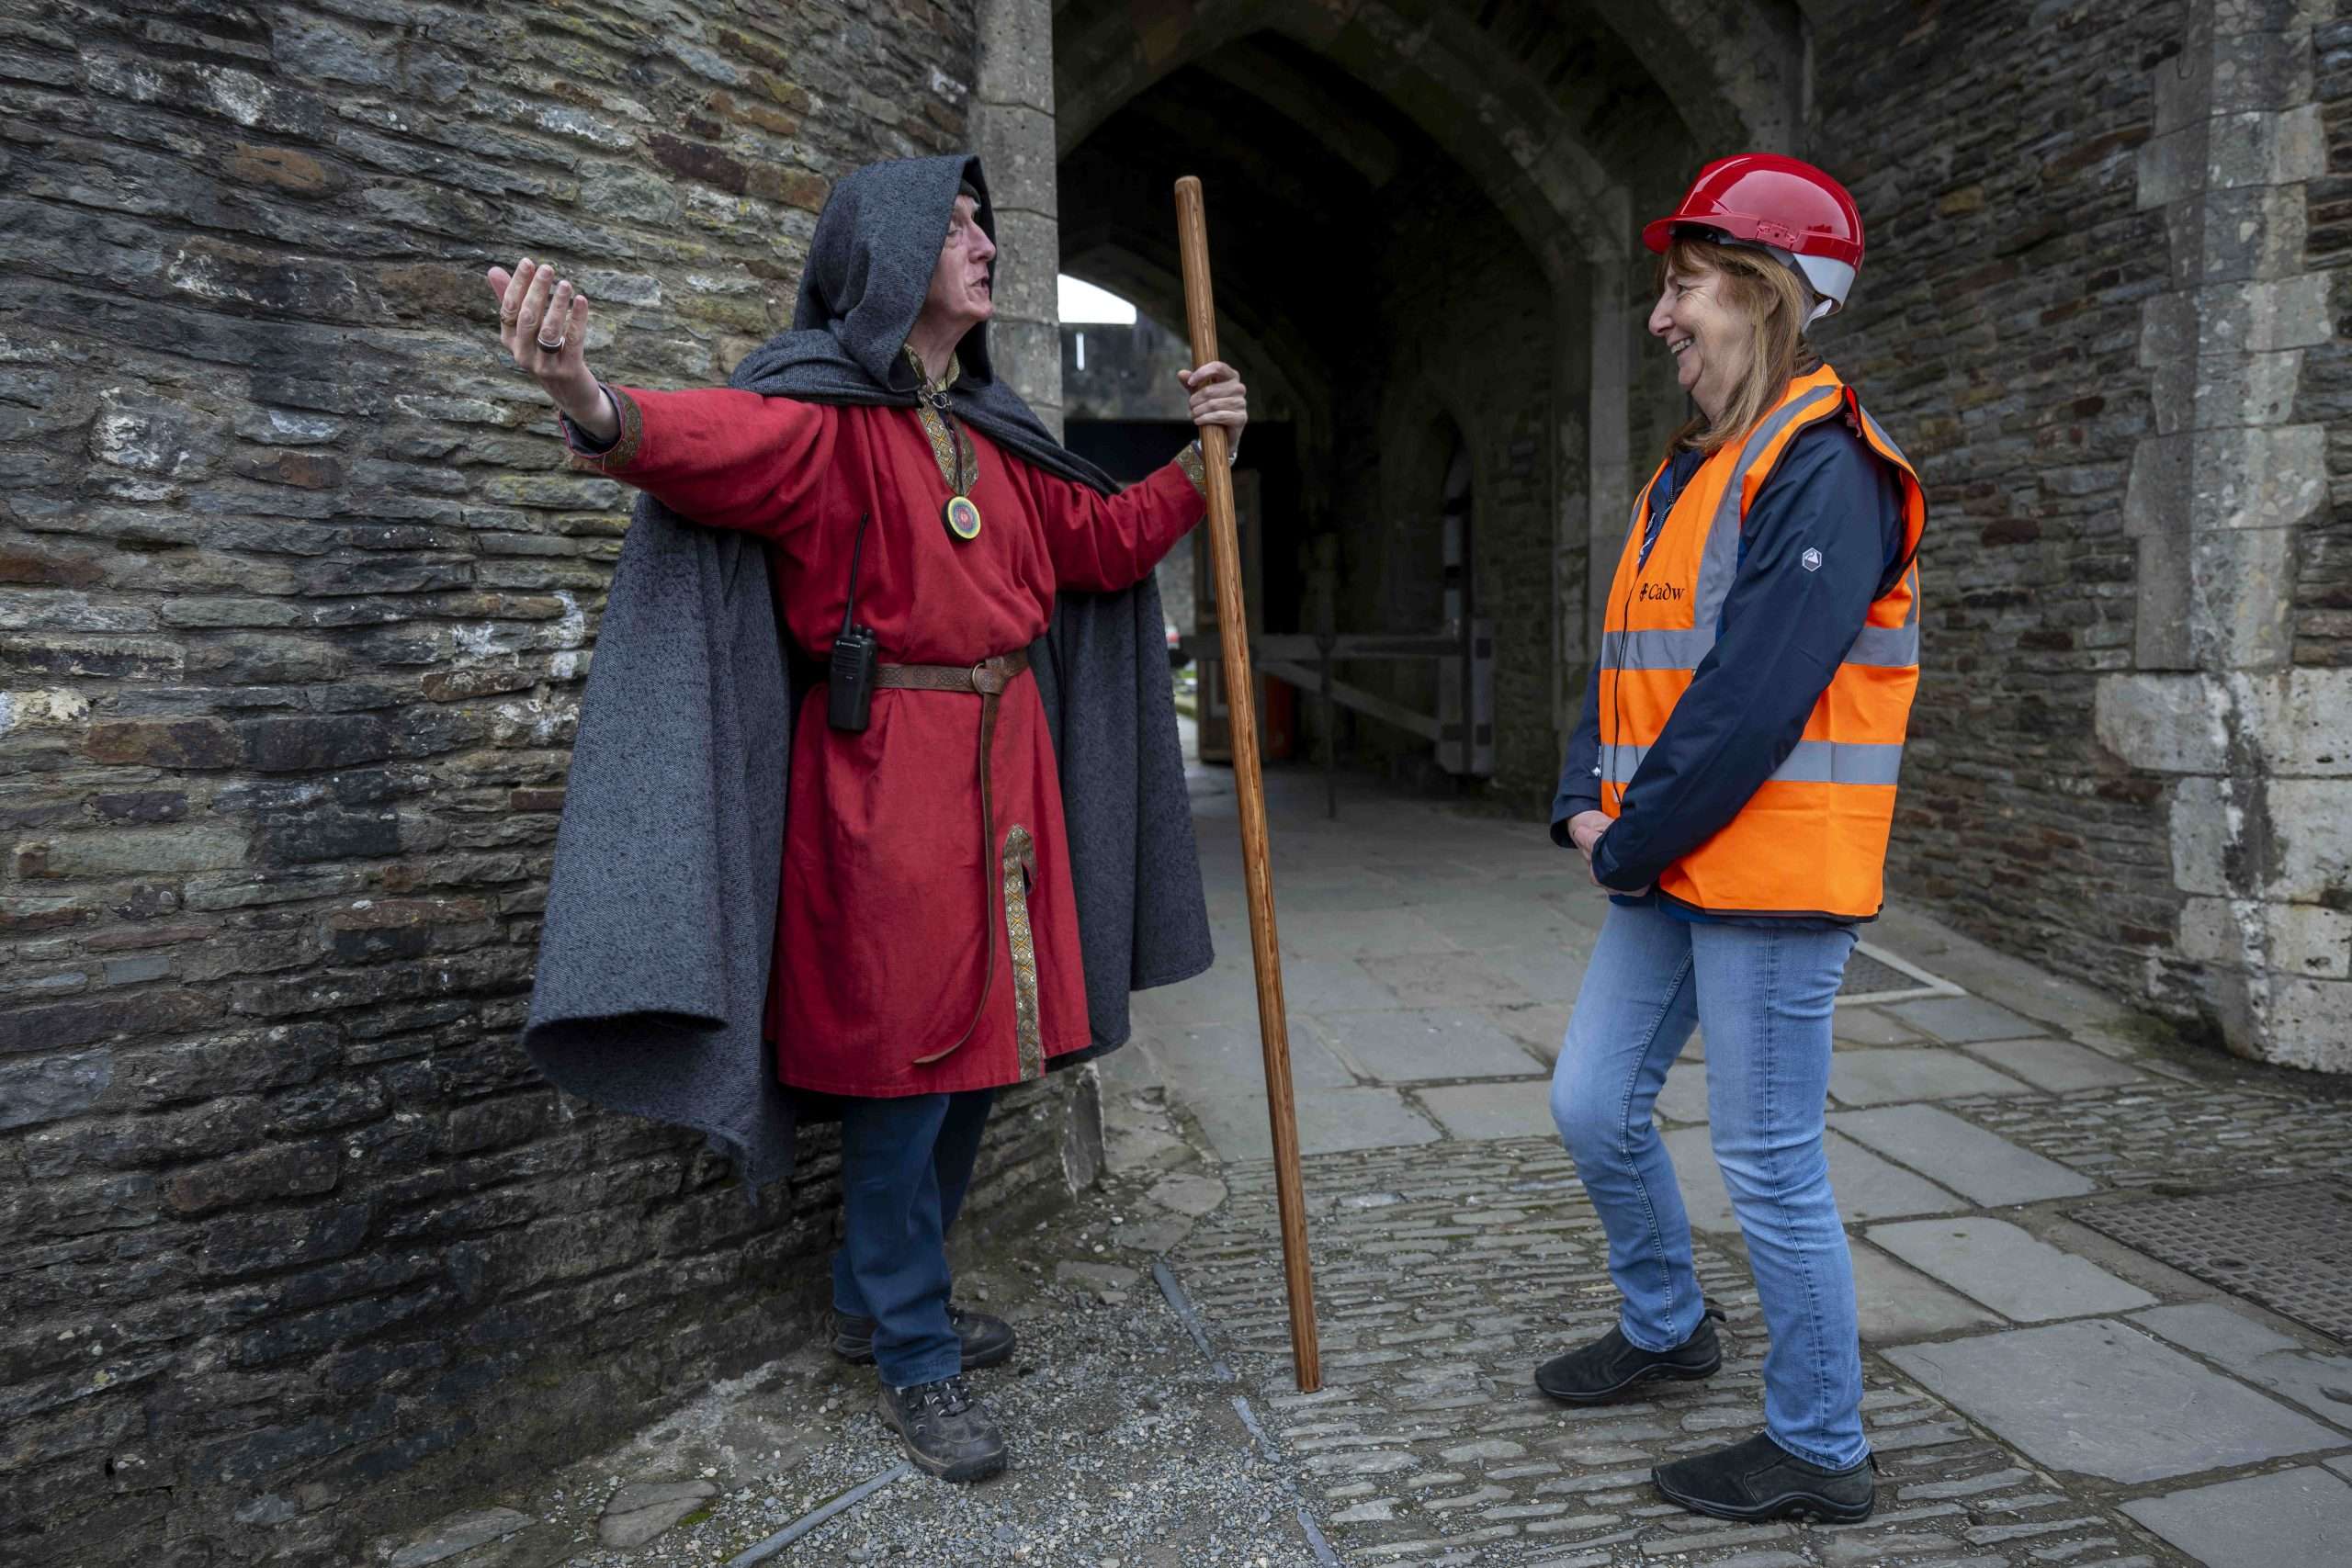 Culture Secretary visits Caerphilly Castle to view £10 million investment progression